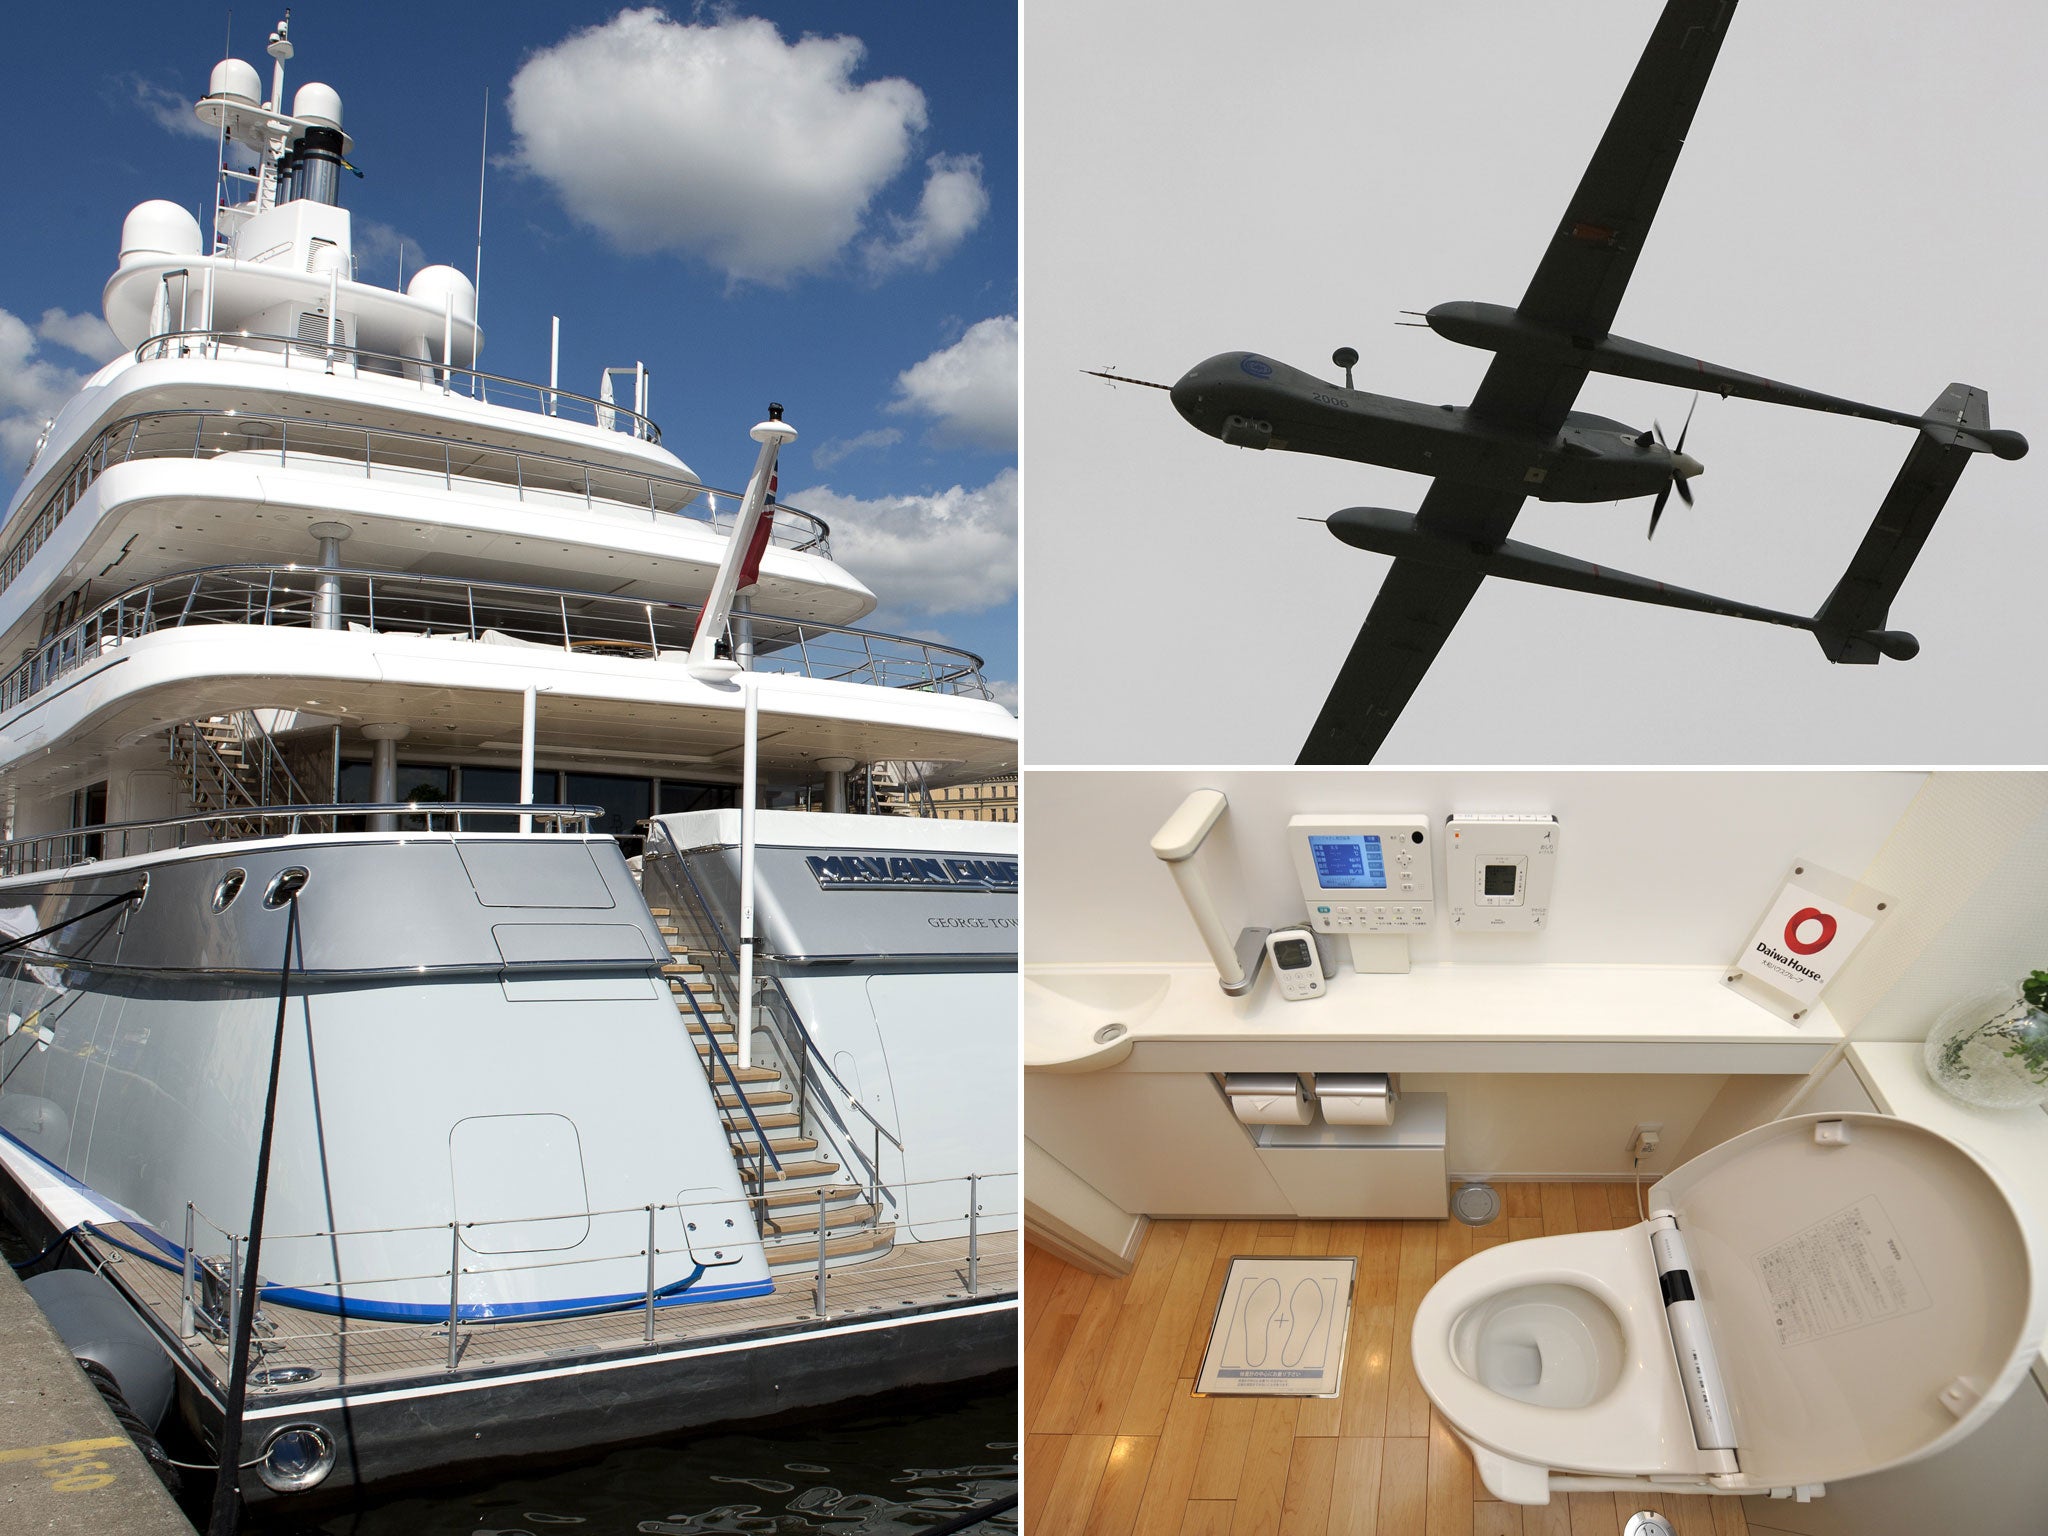 Ships, drones that rely on GPS navigation systems and now toilets can all be hacked